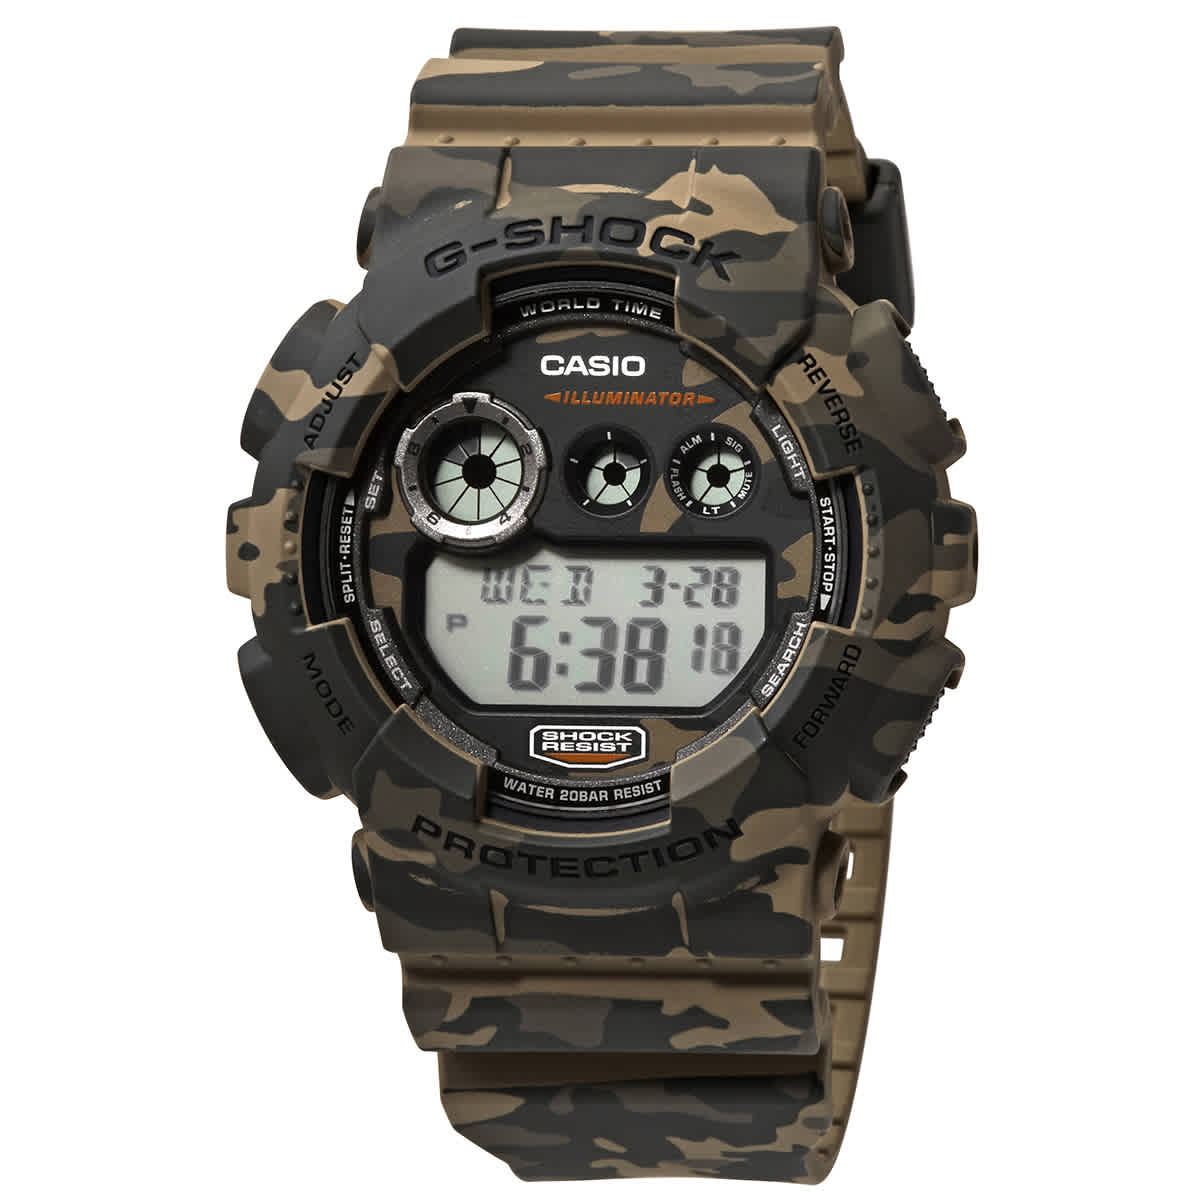 Casio G Shock Classic Brown Camouflage Resin Mens Watch Gd120cm-5cr In Brown / Digital